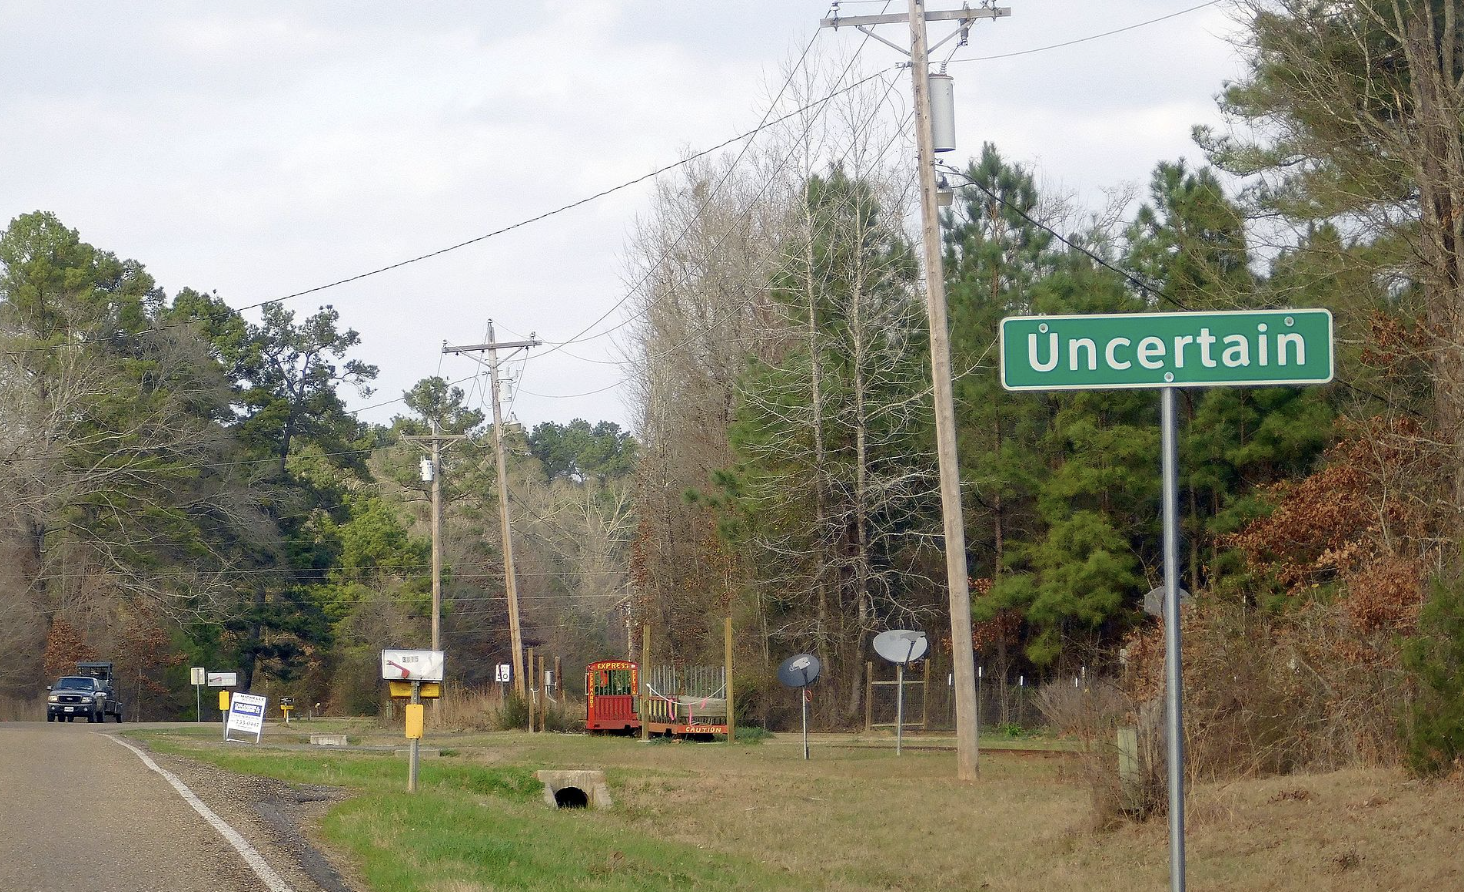 The Most Bizarrely-Named Cities in America